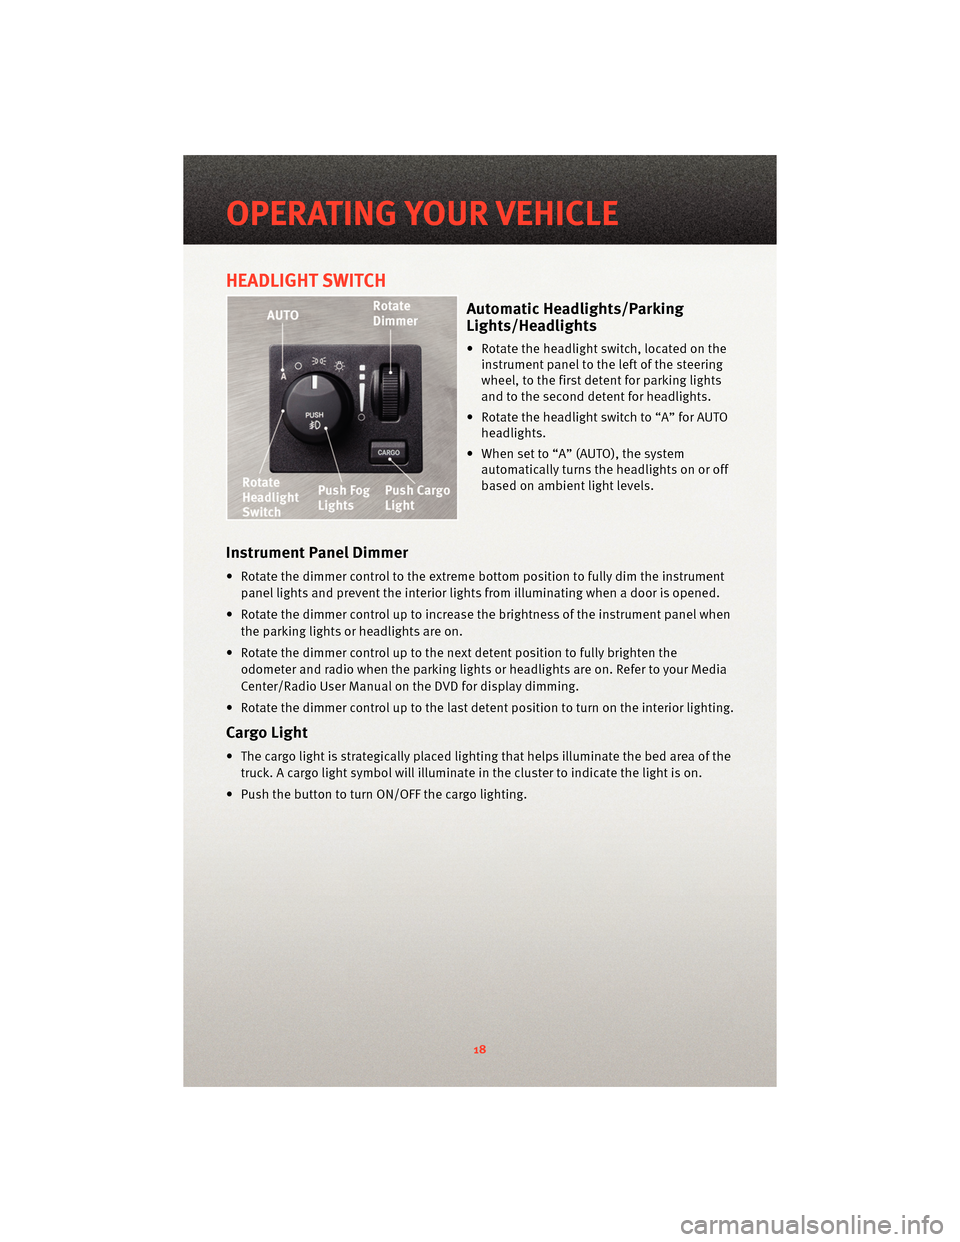 DODGE DAKOTA 2010 3.G User Guide HEADLIGHT SWITCH
Automatic Headlights/Parking
Lights/Headlights
• Rotate the headlight switch, located on theinstrument panel to the left of the steering
wheel, to the first detent for parking light